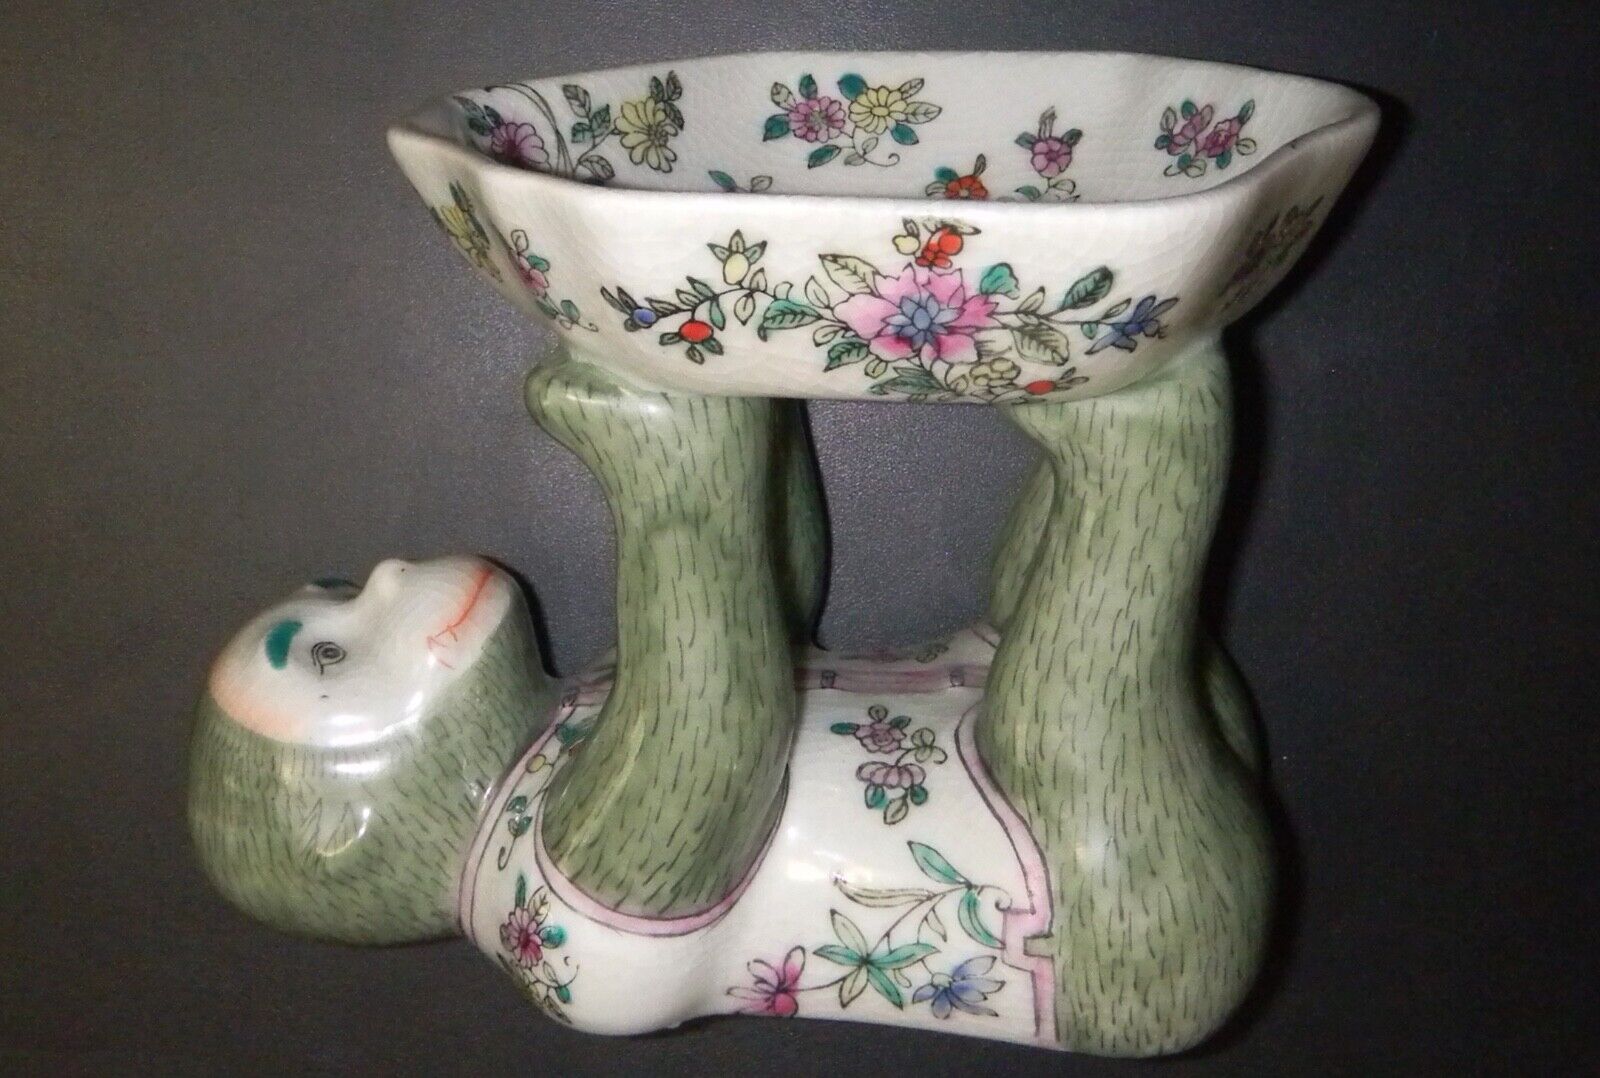 An Early Original Antique Chinese Whimsical Monkey-Servant Porcelain Catch Bowl